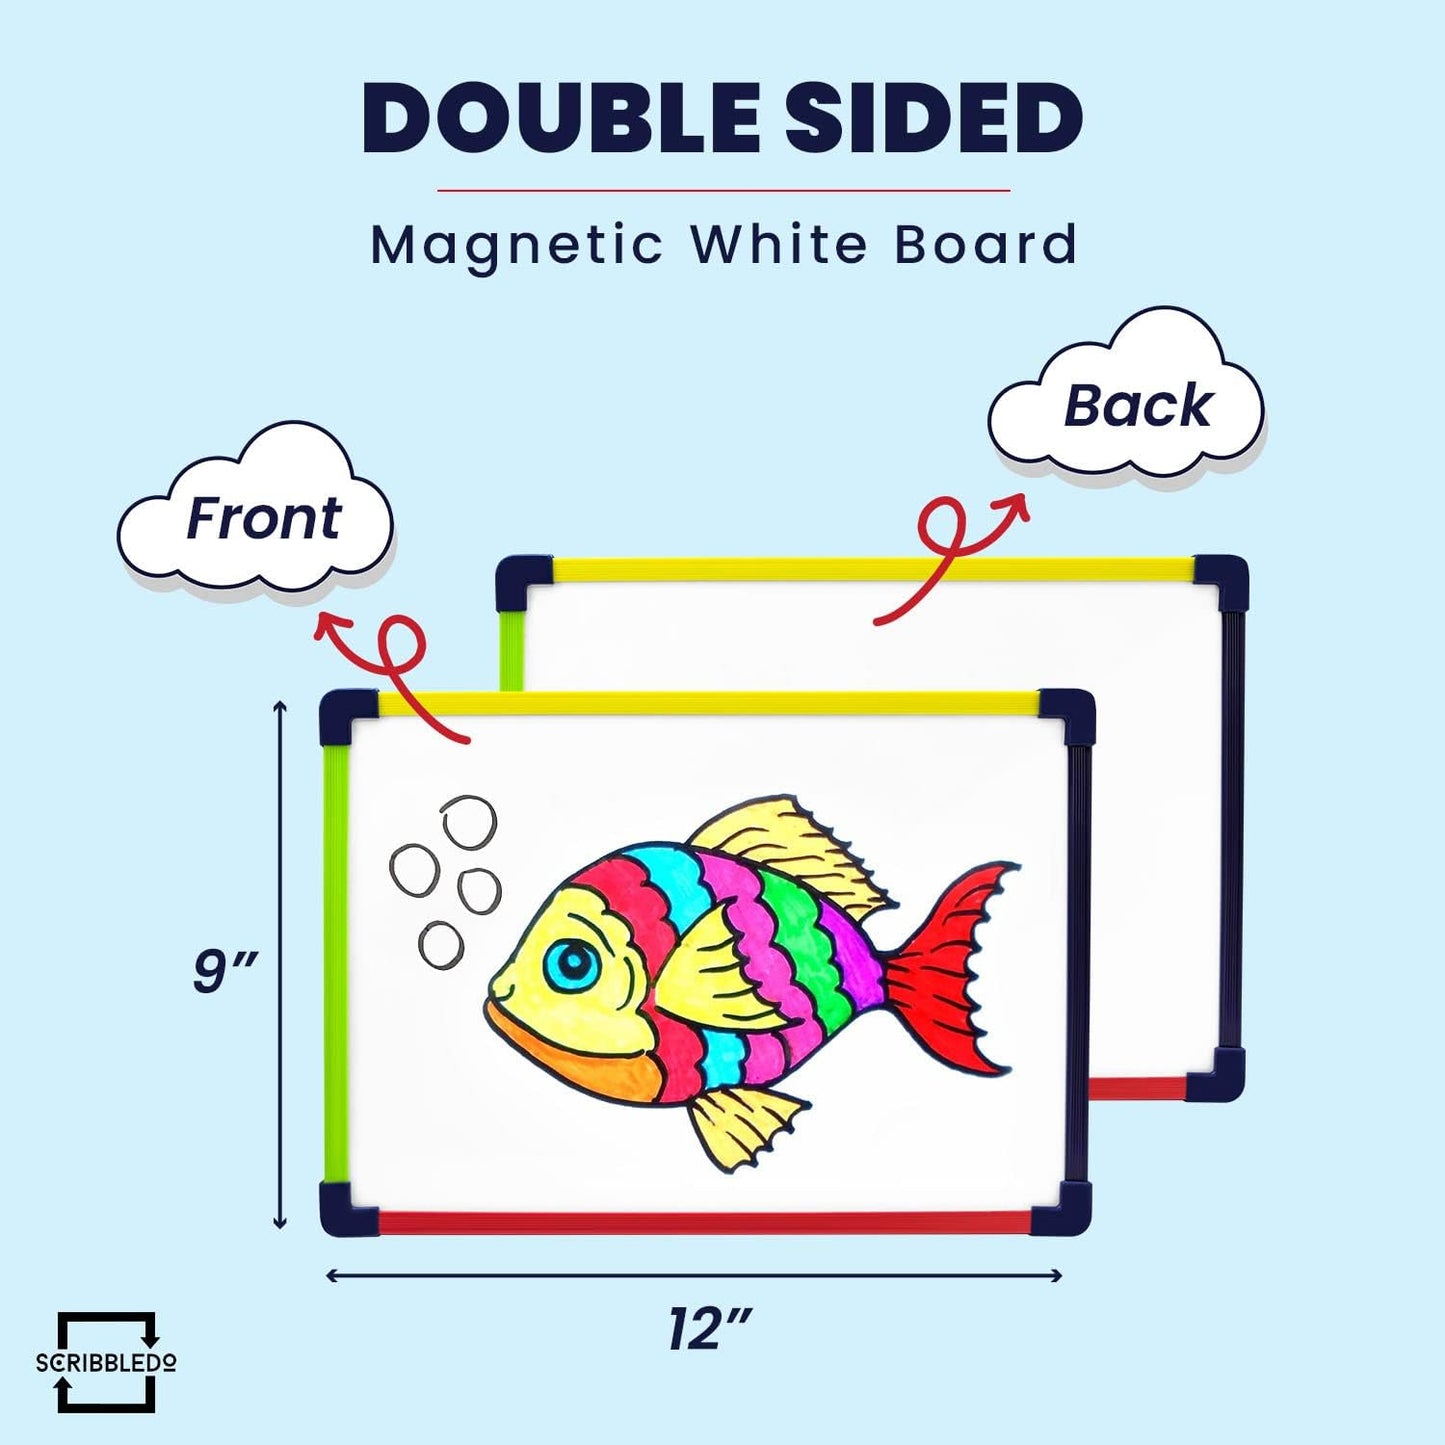 Magnetic Travel Whiteboard 9"x12" with Markers